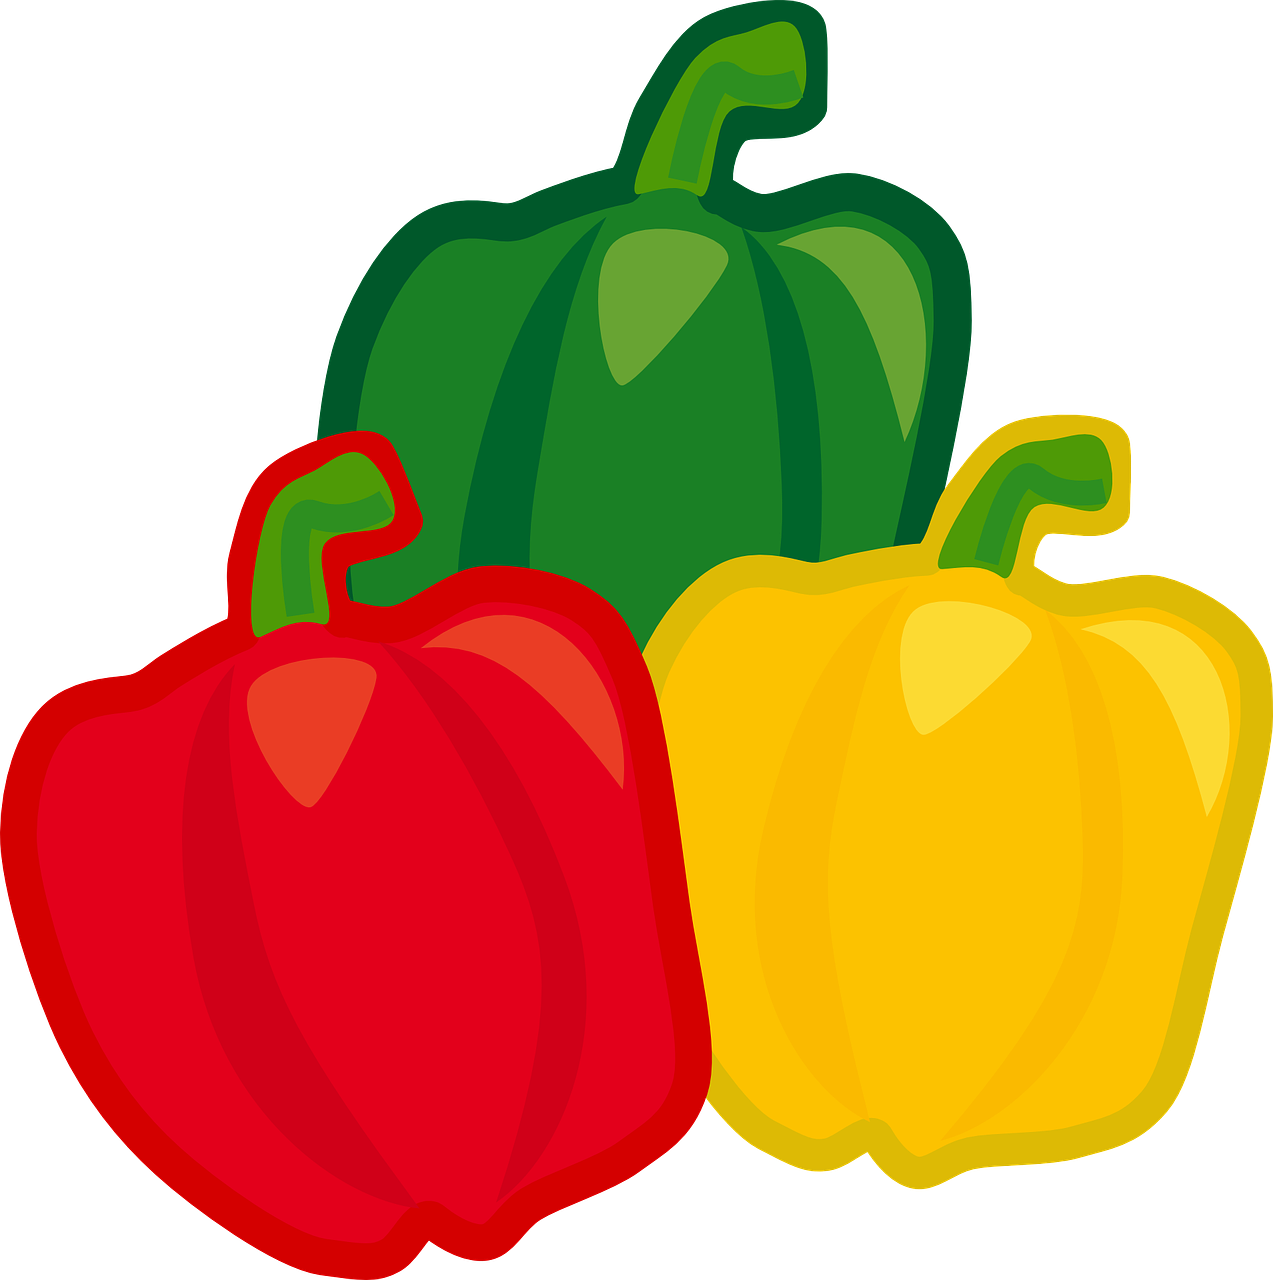 bell pepper food vegetables free photo